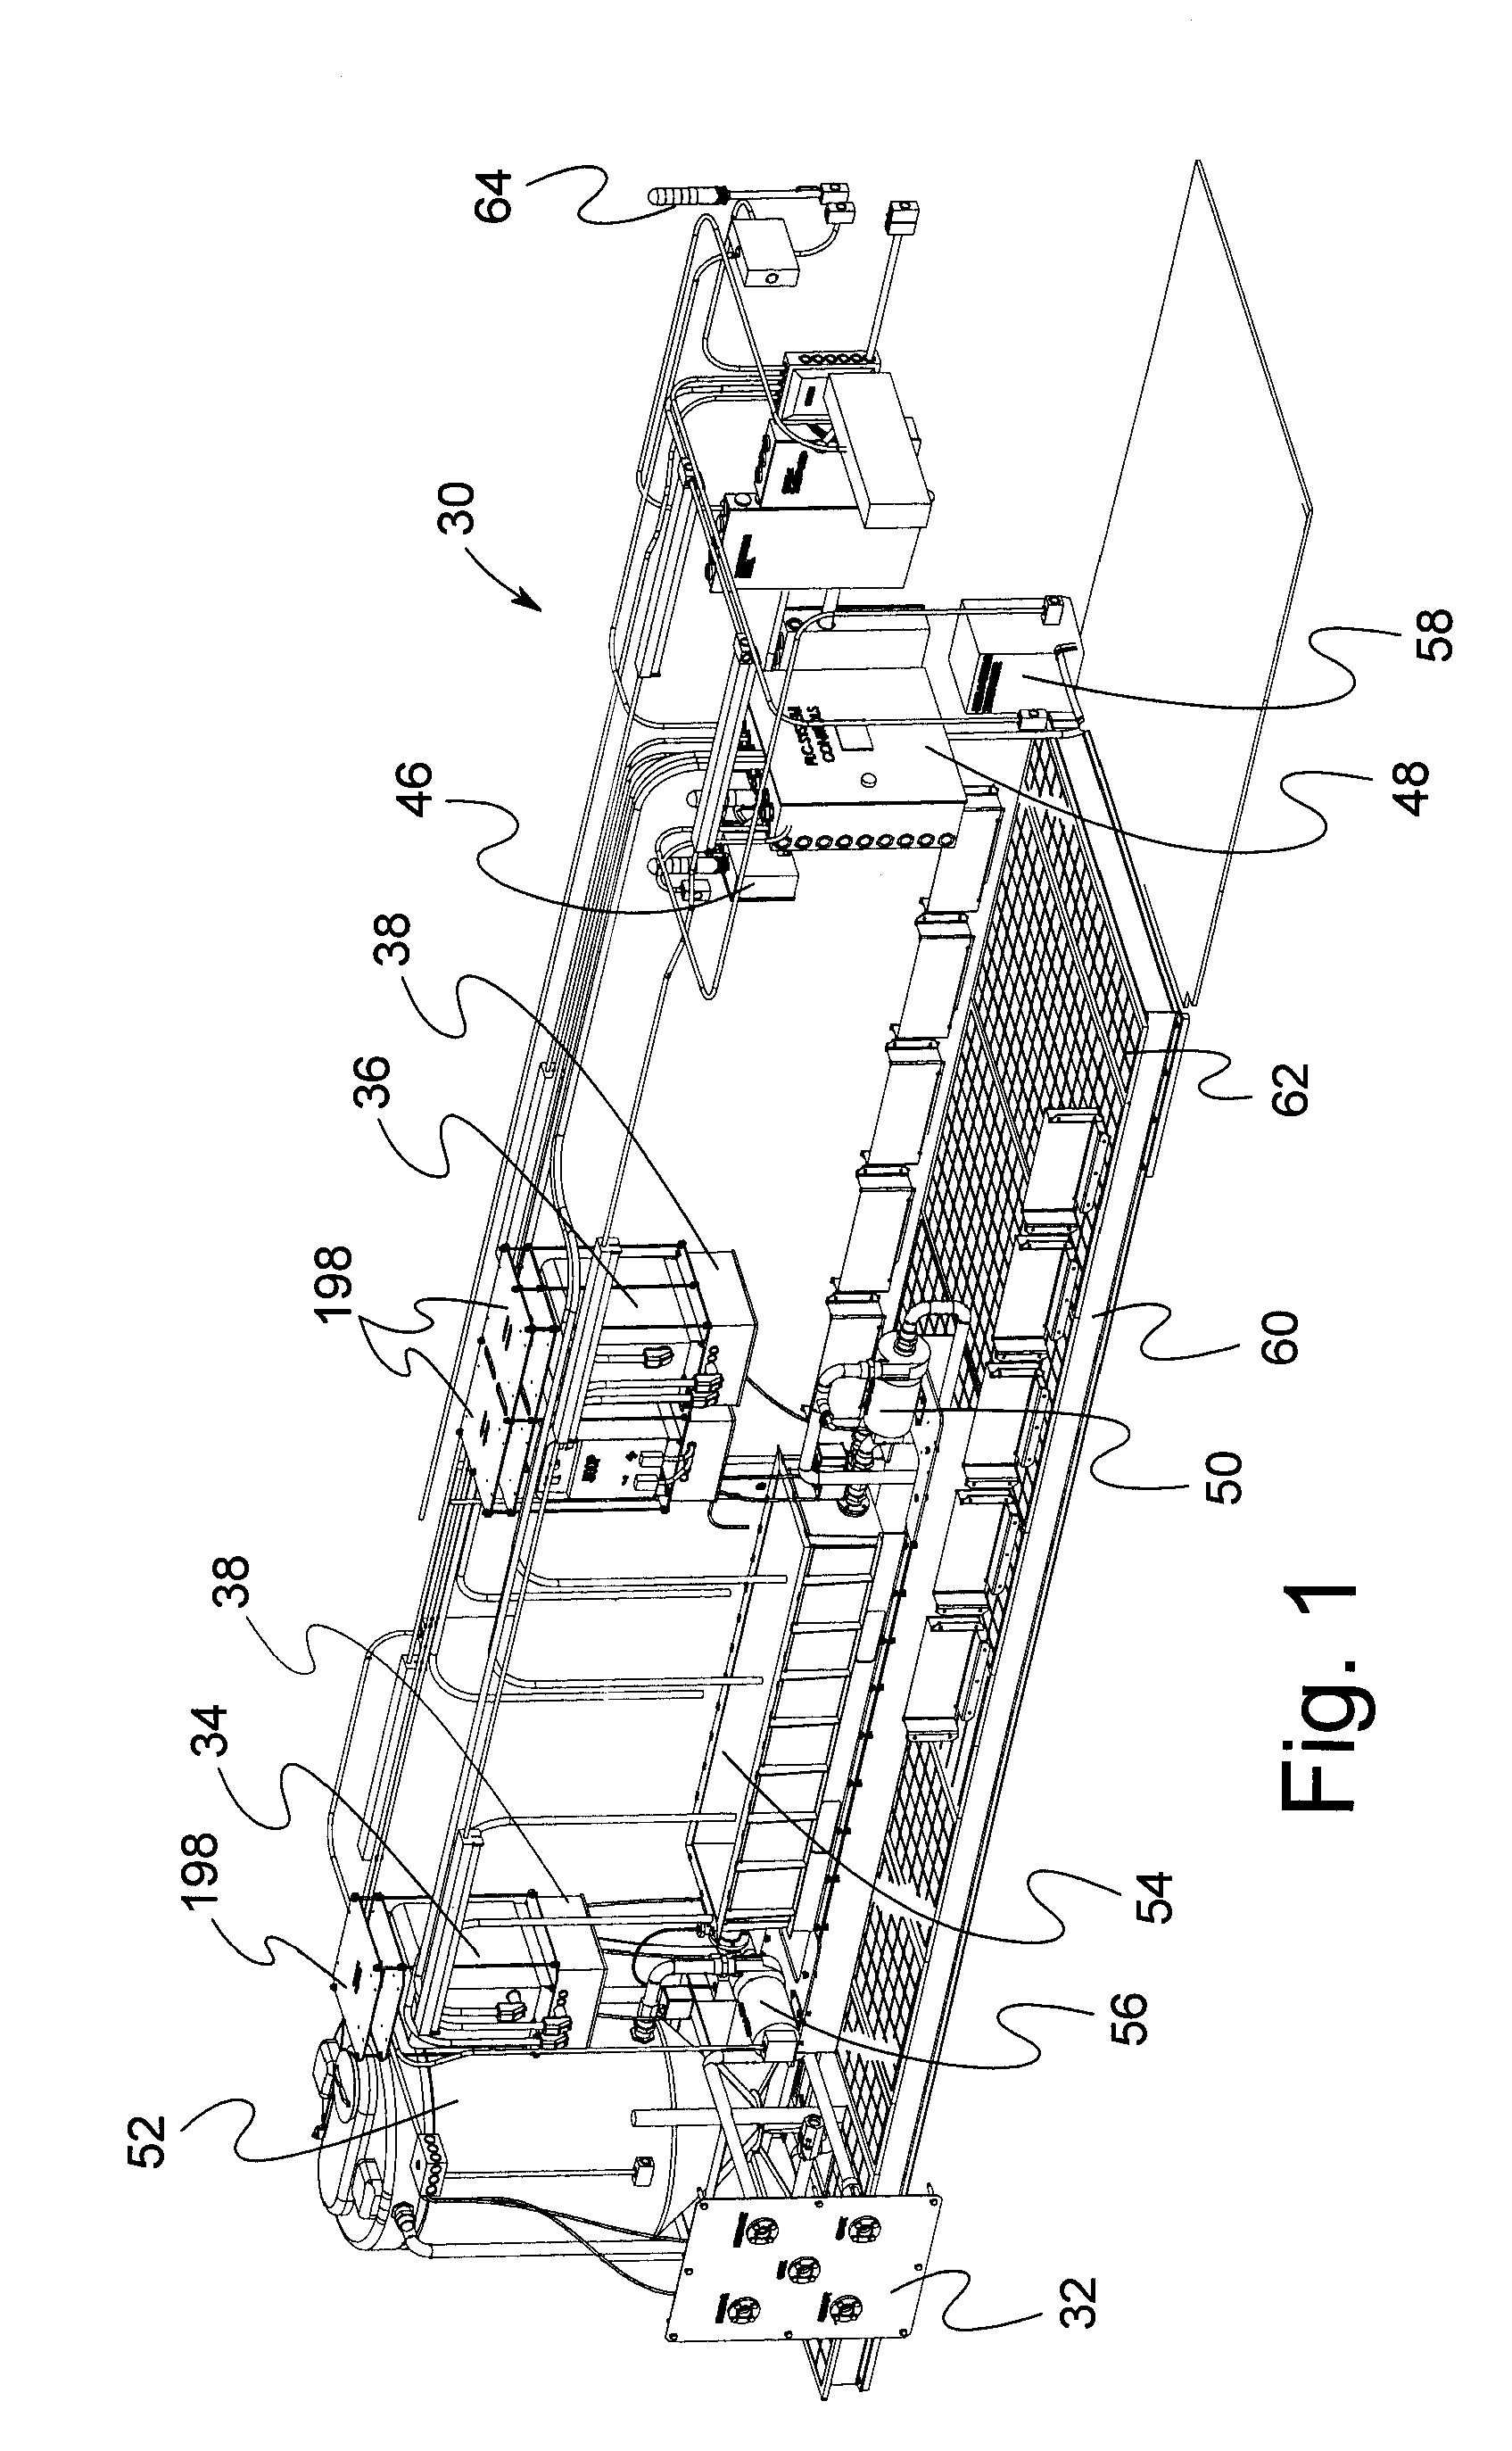 Method and Apparatus for Producing High Volumes of Clean Water by Electro Coagulation